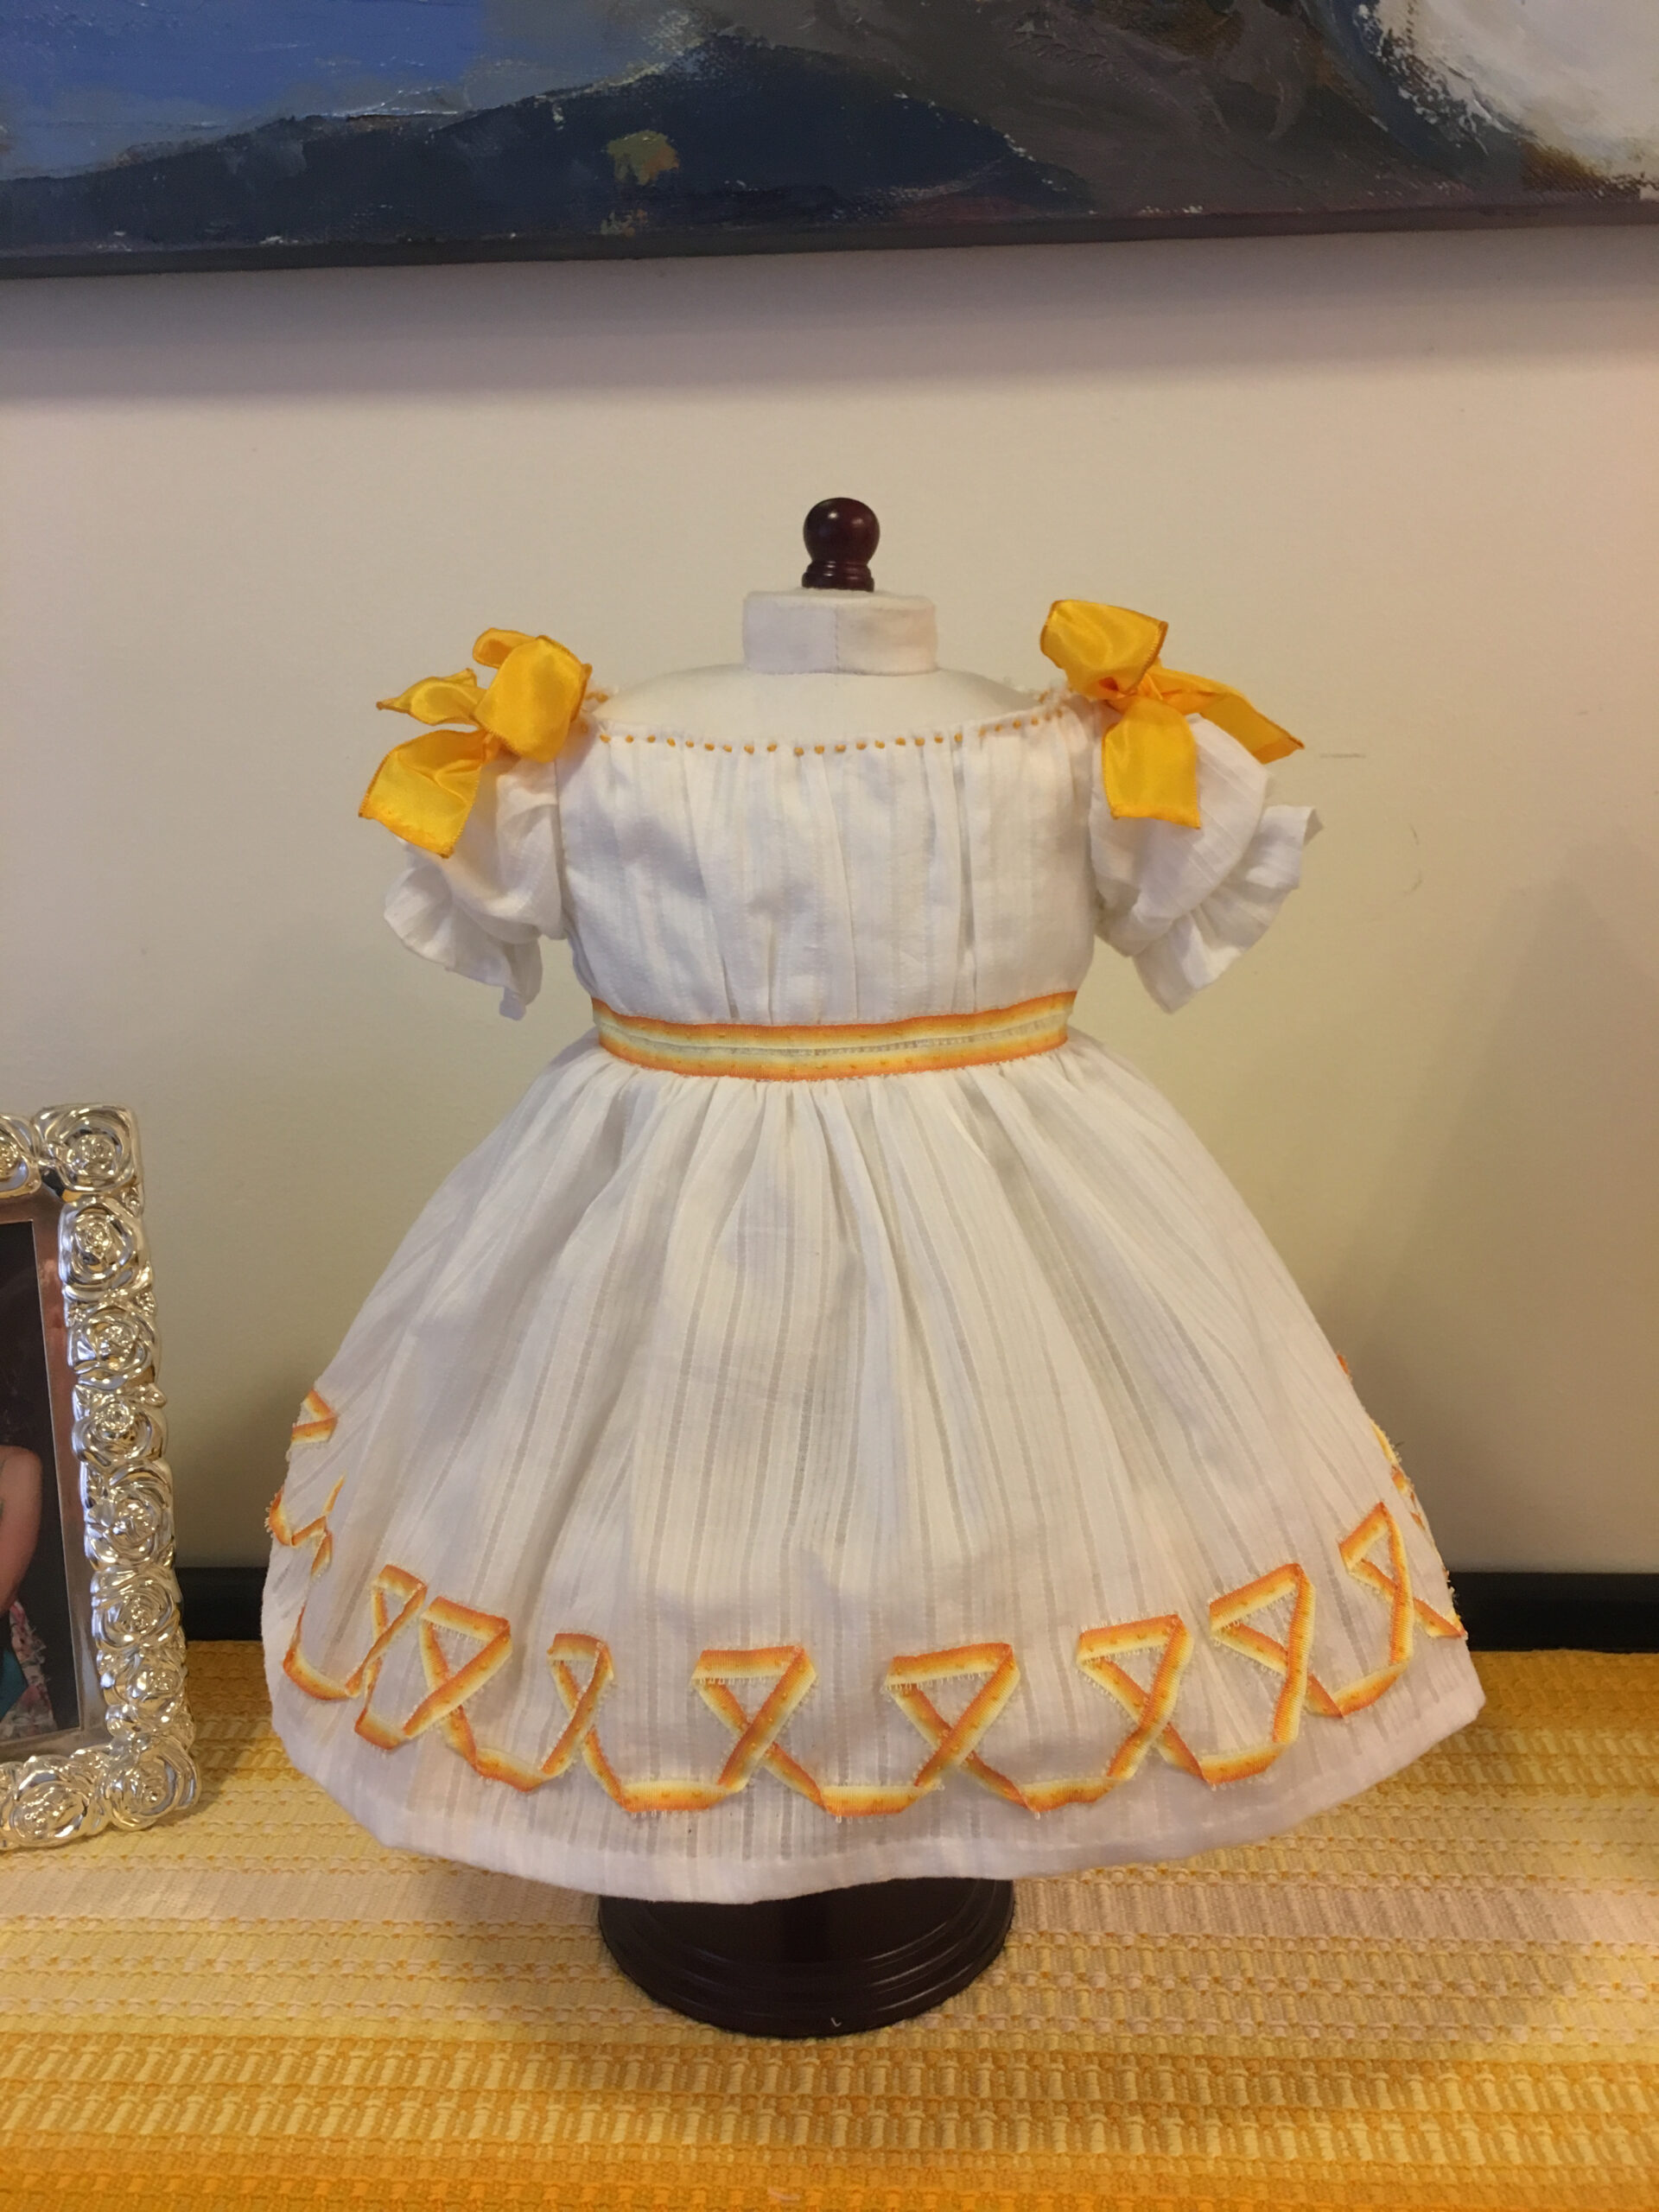 The front view of the Winterhalter princess dress - a white dress with a full skirt, gathered bodice front and puffed sleeves. There are yellow bows on the shoulders and yellow orange trimming on the skirt and waist.